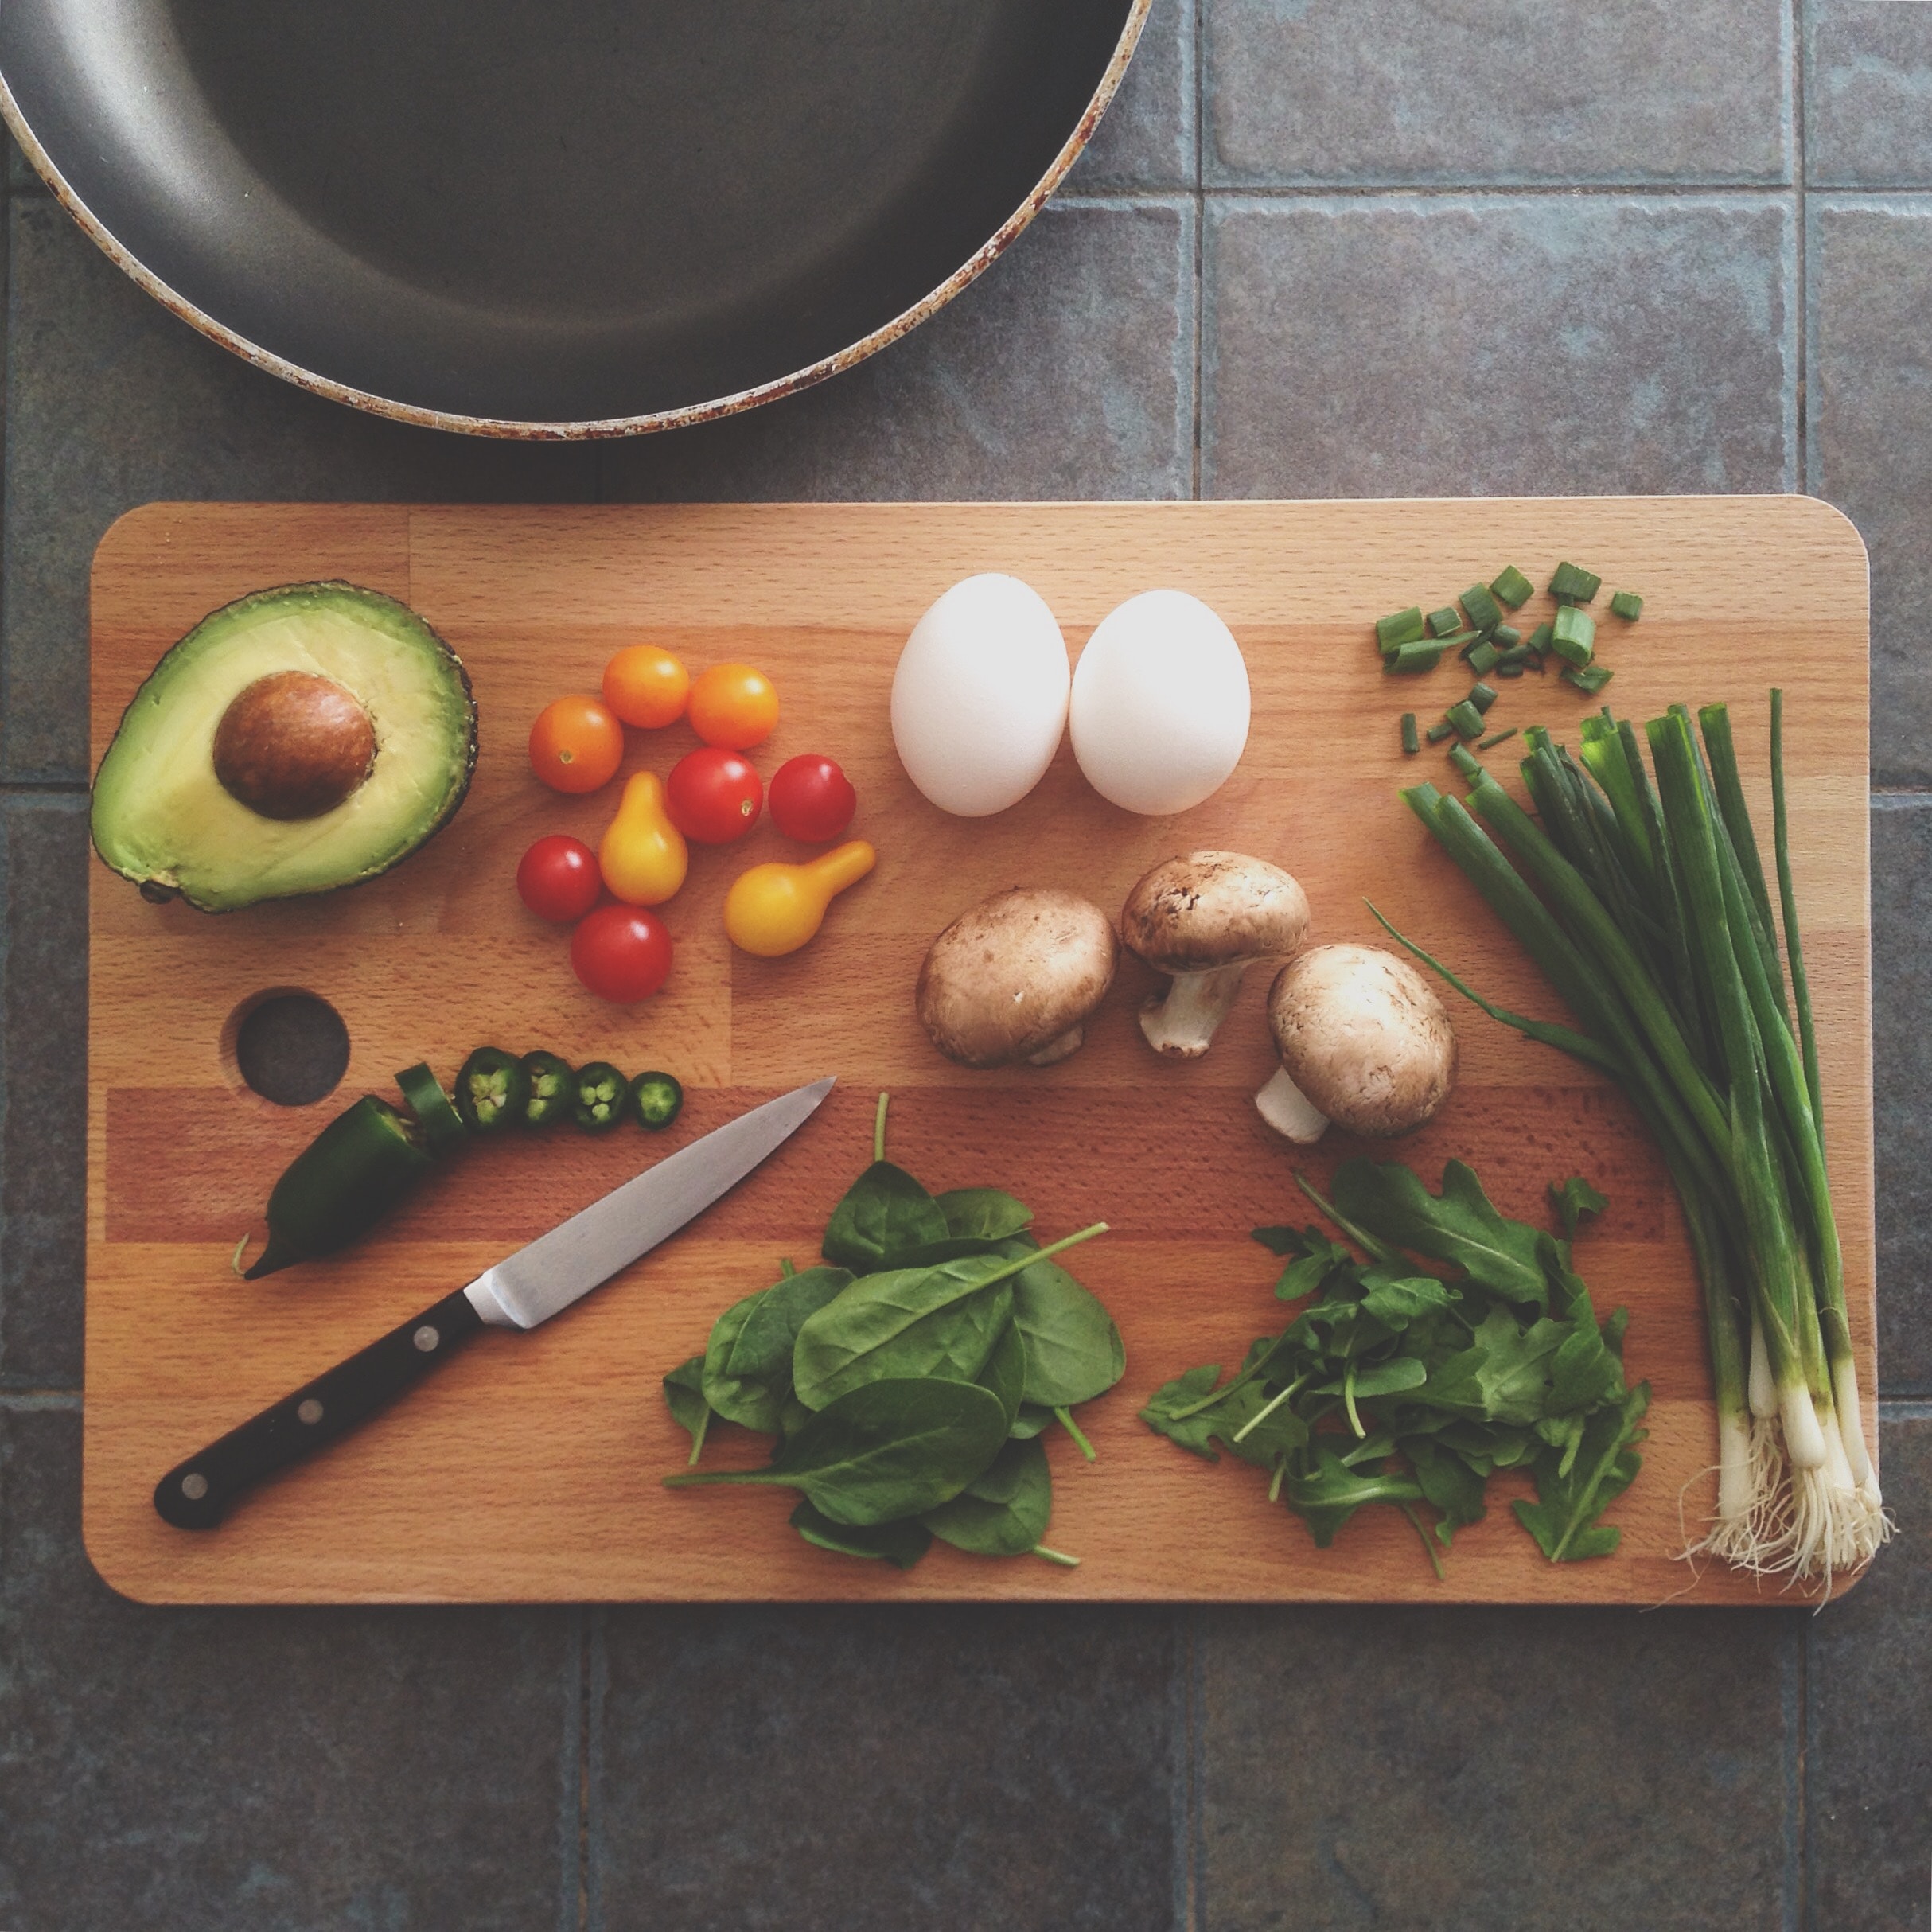 Tips For Cleaning a Cutting Board